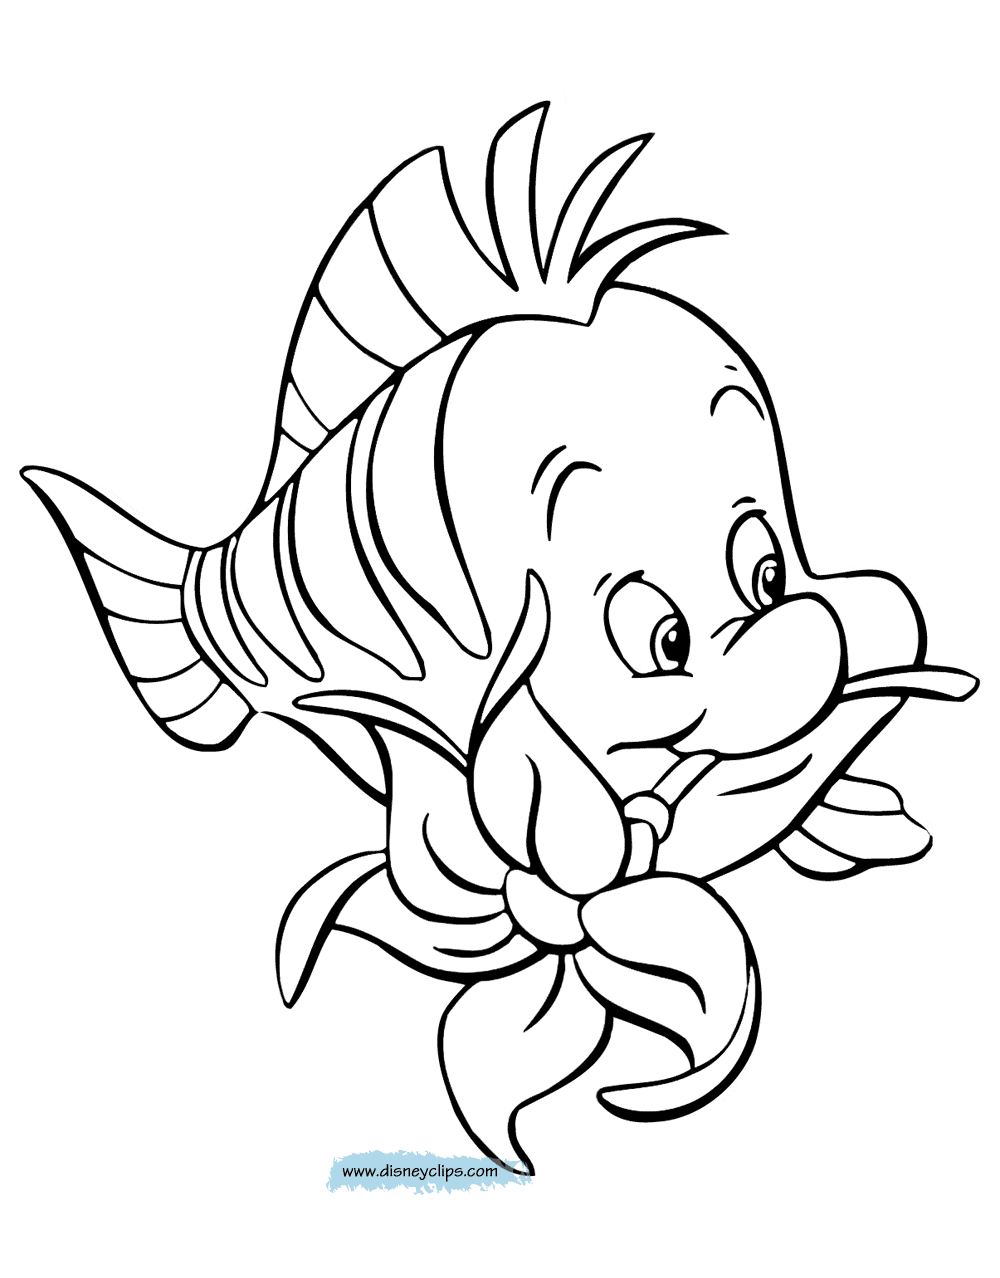 ariel the little mermaid coloring pages ariel the little mermaid coloring pages for girls to print coloring little ariel pages the mermaid 